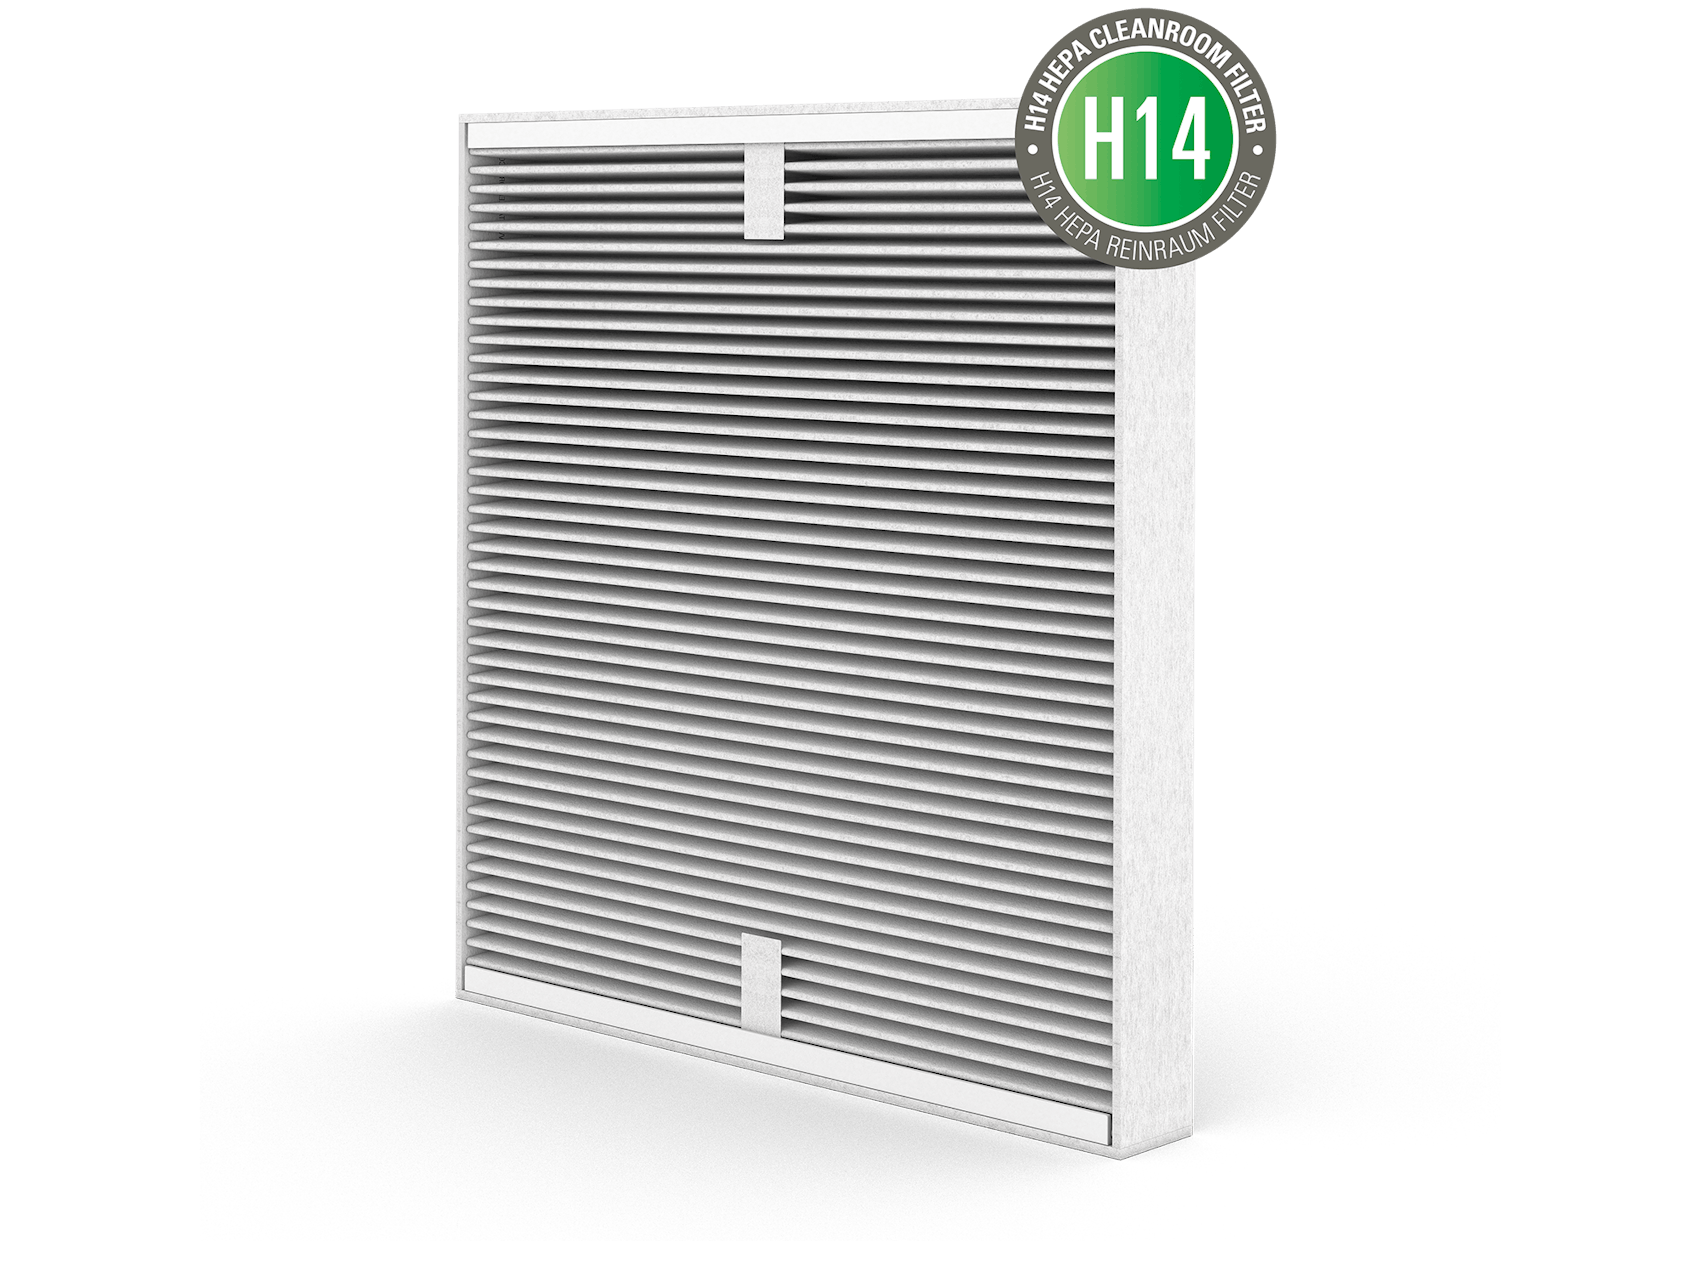 Roger and Roger big air purifier Dual Filter with HEPA H14 & activated carbon filter by Stadler Form